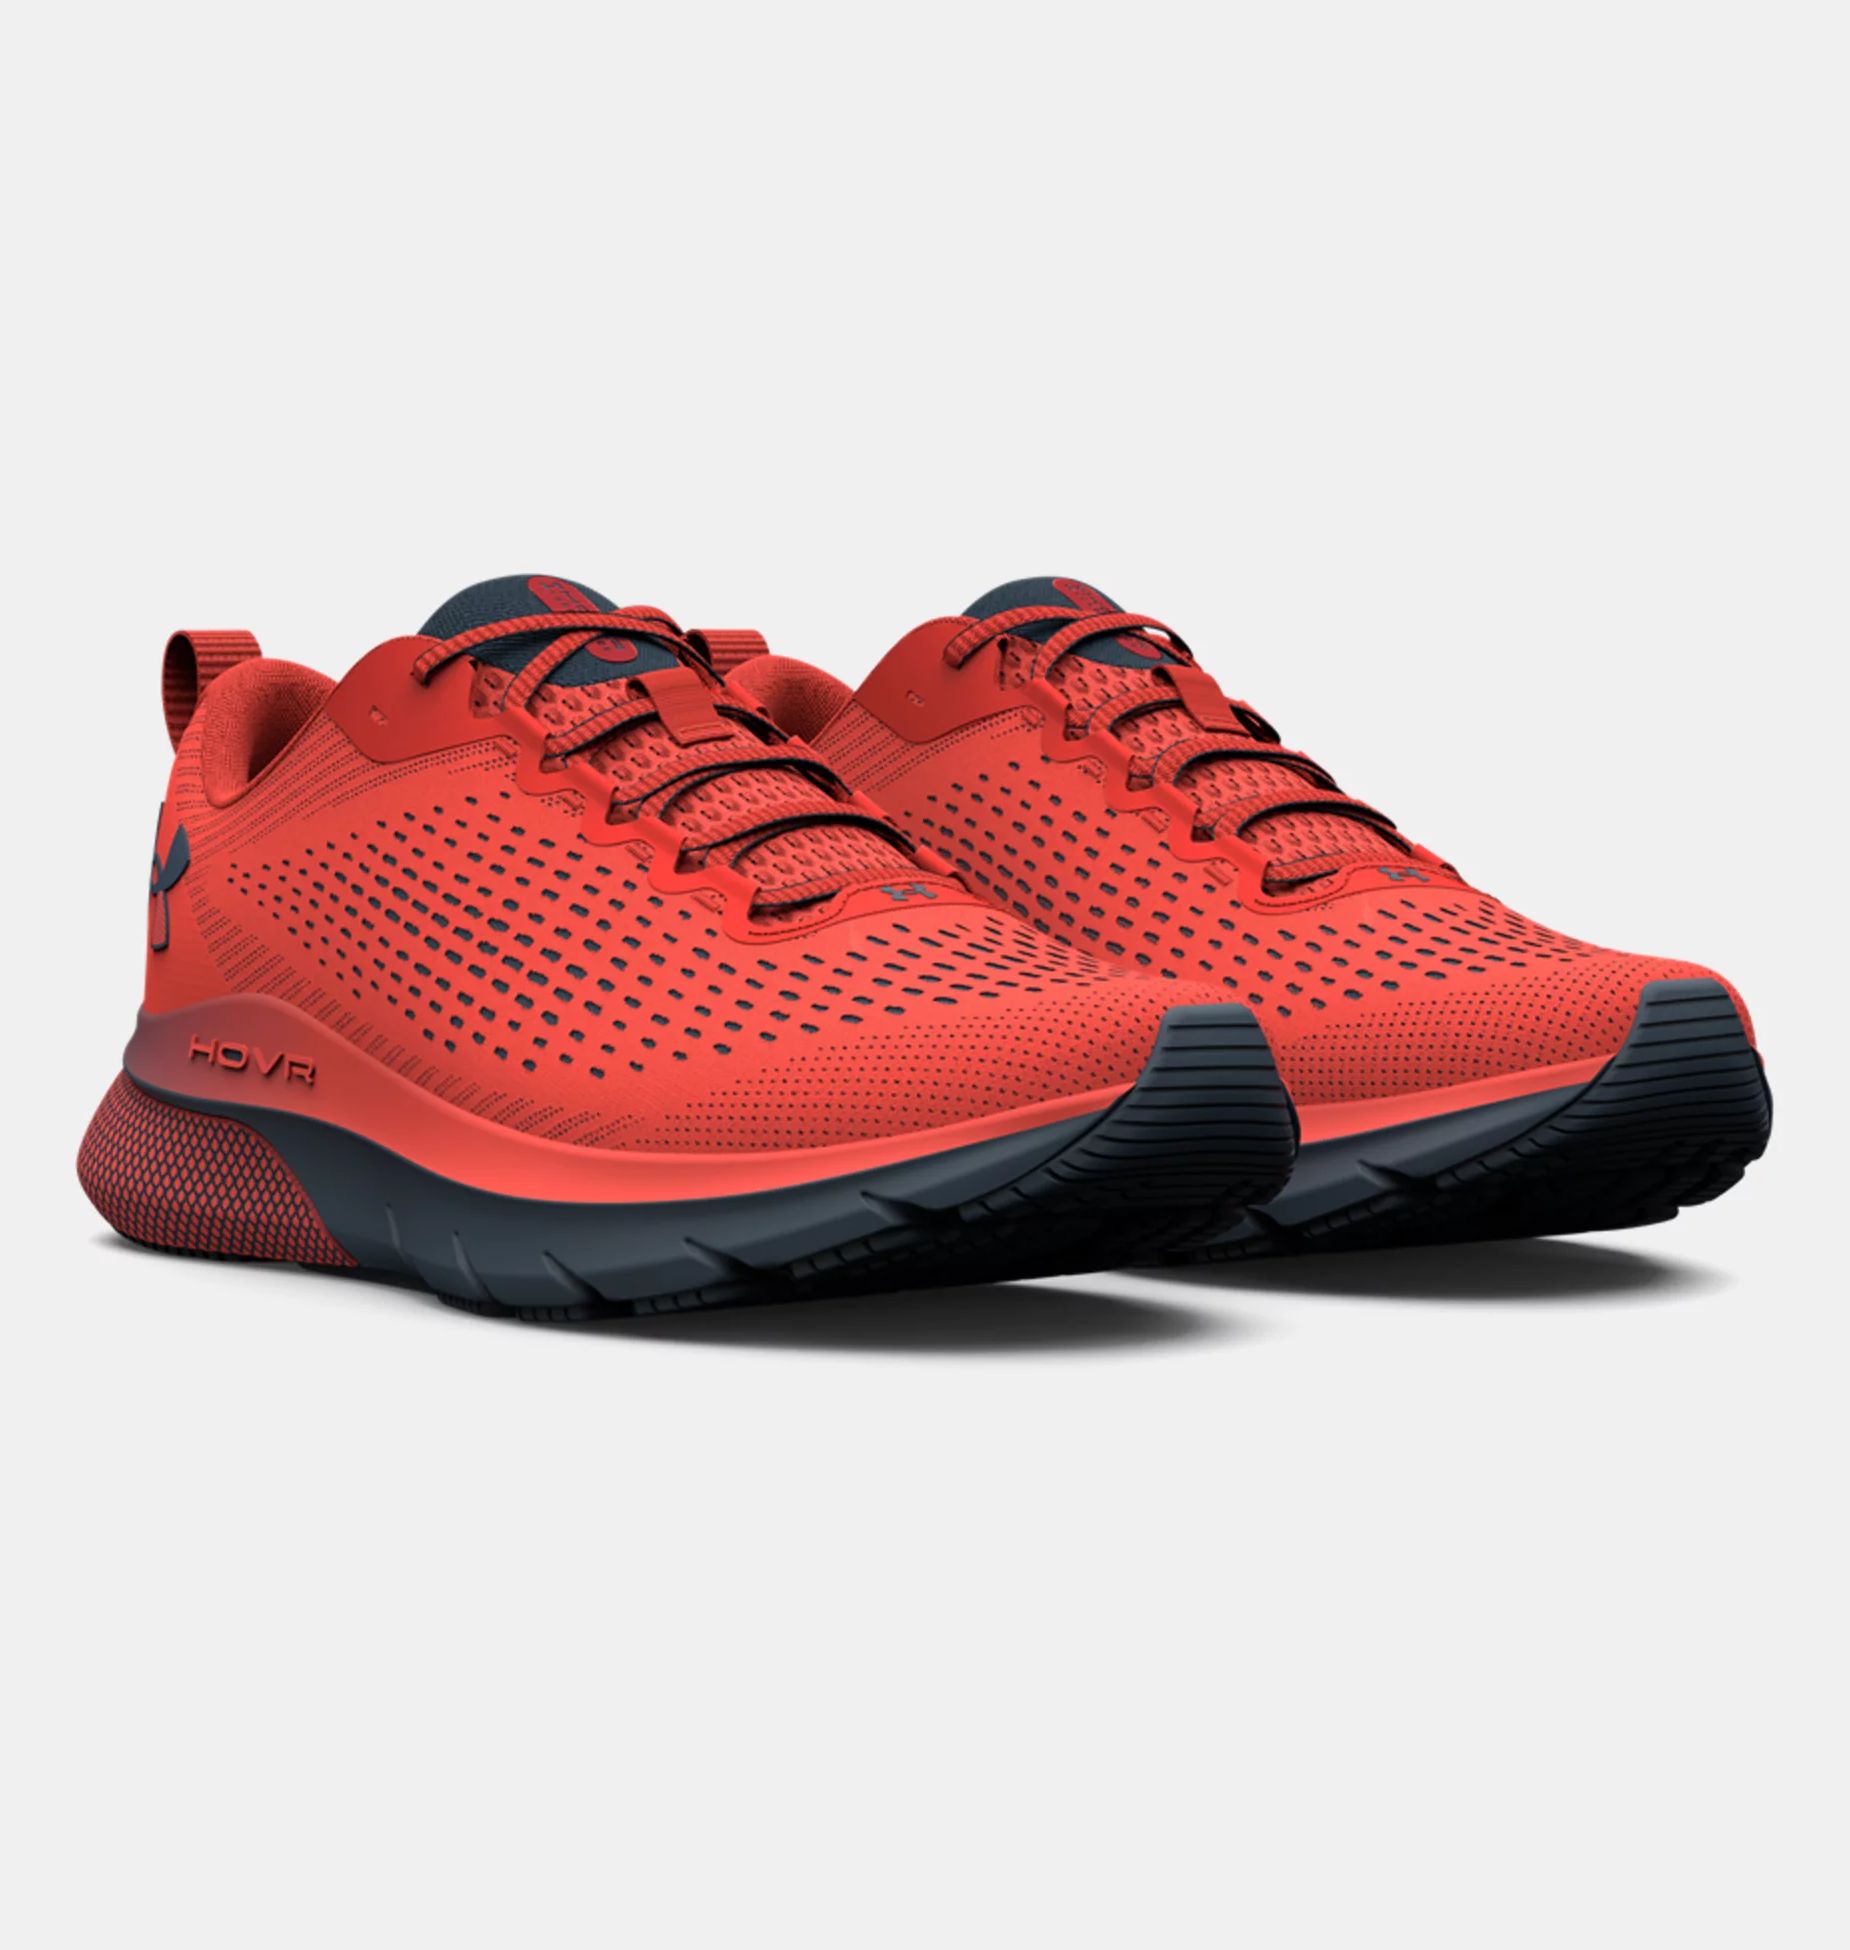 Incaltaminte De Alergare -  under armour HOVR Turbulence Running Shoes